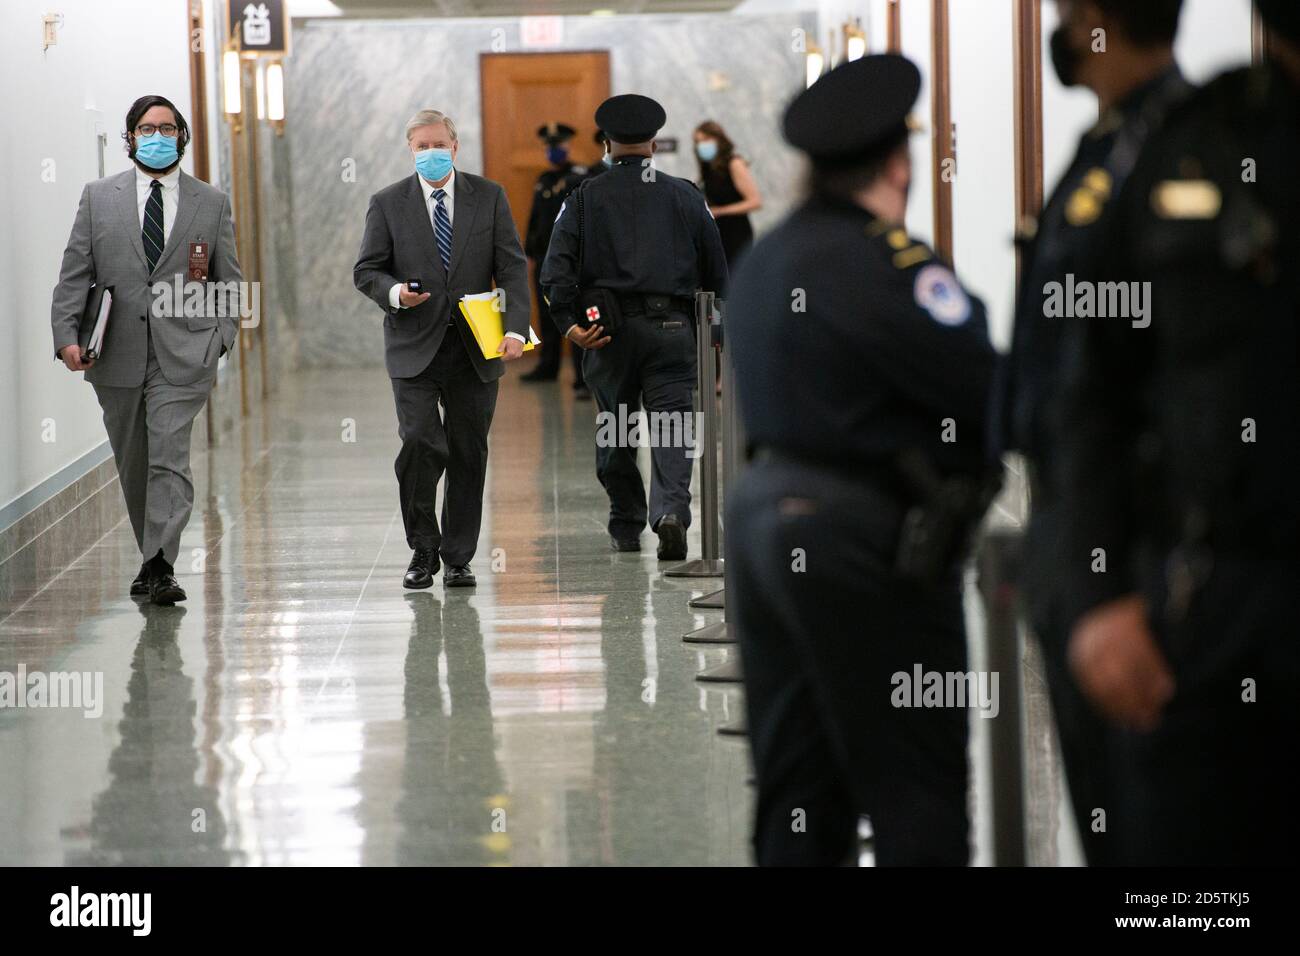 U.S. Senator Lindsey Graham (R-SC) arrives on Capitol Hill for the third day of Senate Judiciary Committee hearings considering the nomination of Judge Amy Coney Barrett to become Associate Justice of the U.S. Supreme Court in Washington, DC, on October 14, 2020, amid the coronavirus pandemic. The committee hearings are expected to last four days, and if confirmed, Barrett would replace Justice Ruth Bader Ginsburg to become President Trump's third nominee to be confirmed to the Court. (Graeme Sloan/Sipa USA) (Graeme Sloan/Sipa USA) Stock Photo